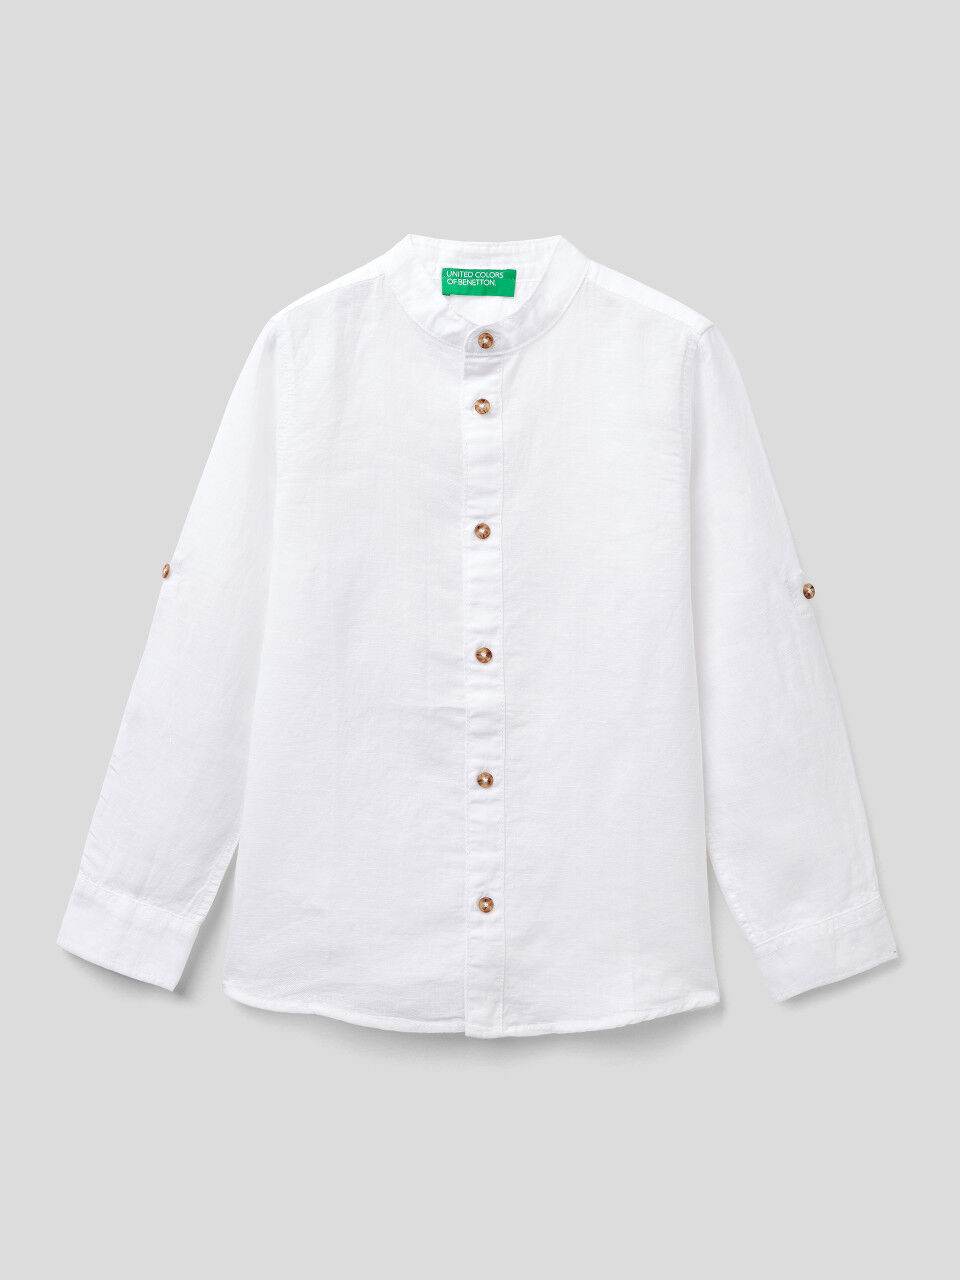 United Colors of Benetton Jungen Camicia Hemd